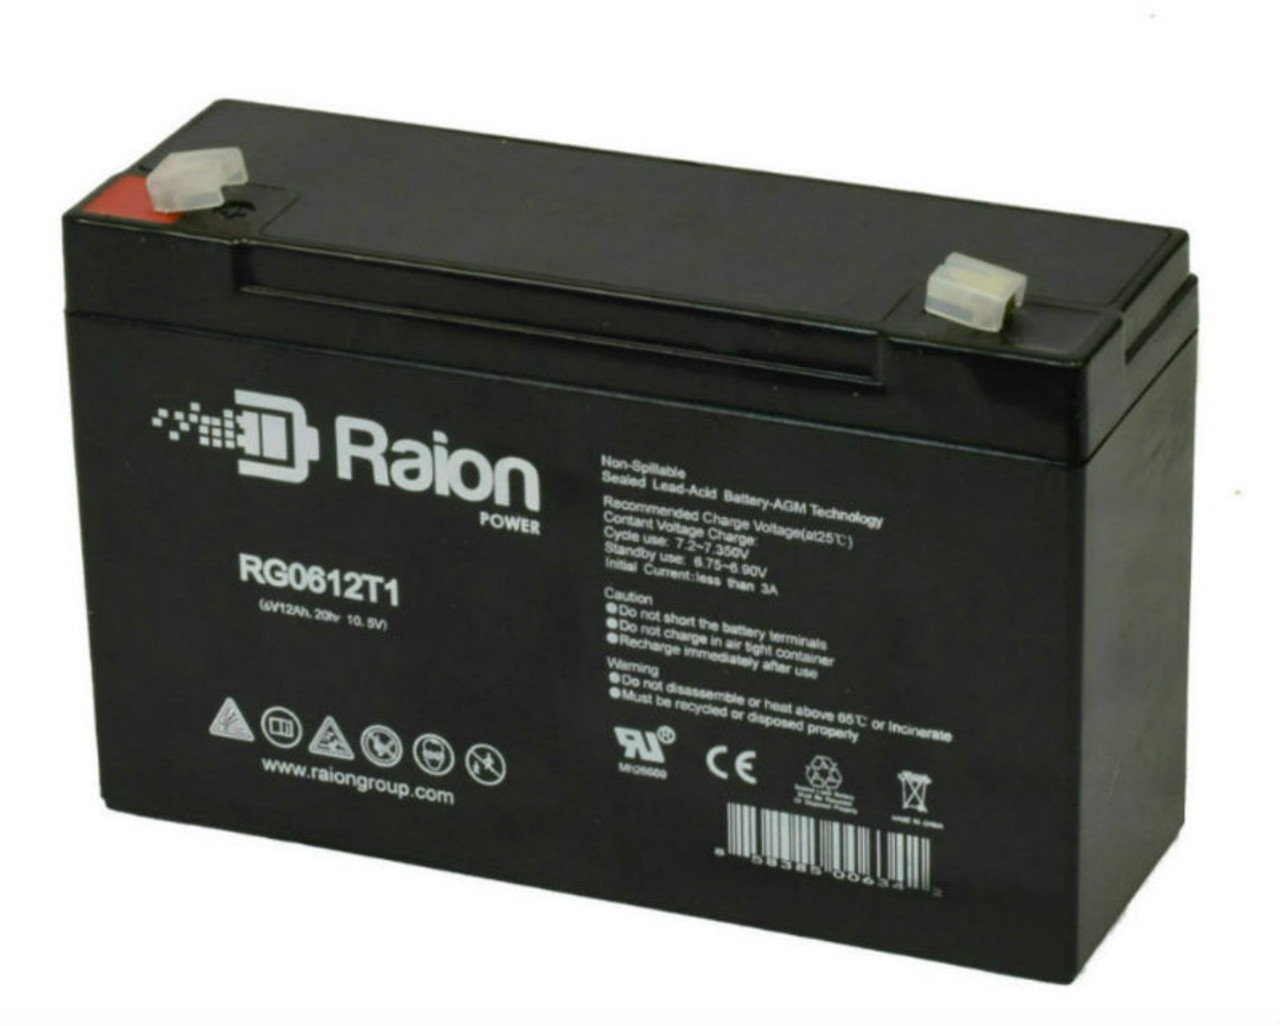 Raion Power RG06120T1 Replacement Battery for FirstPower FP6120